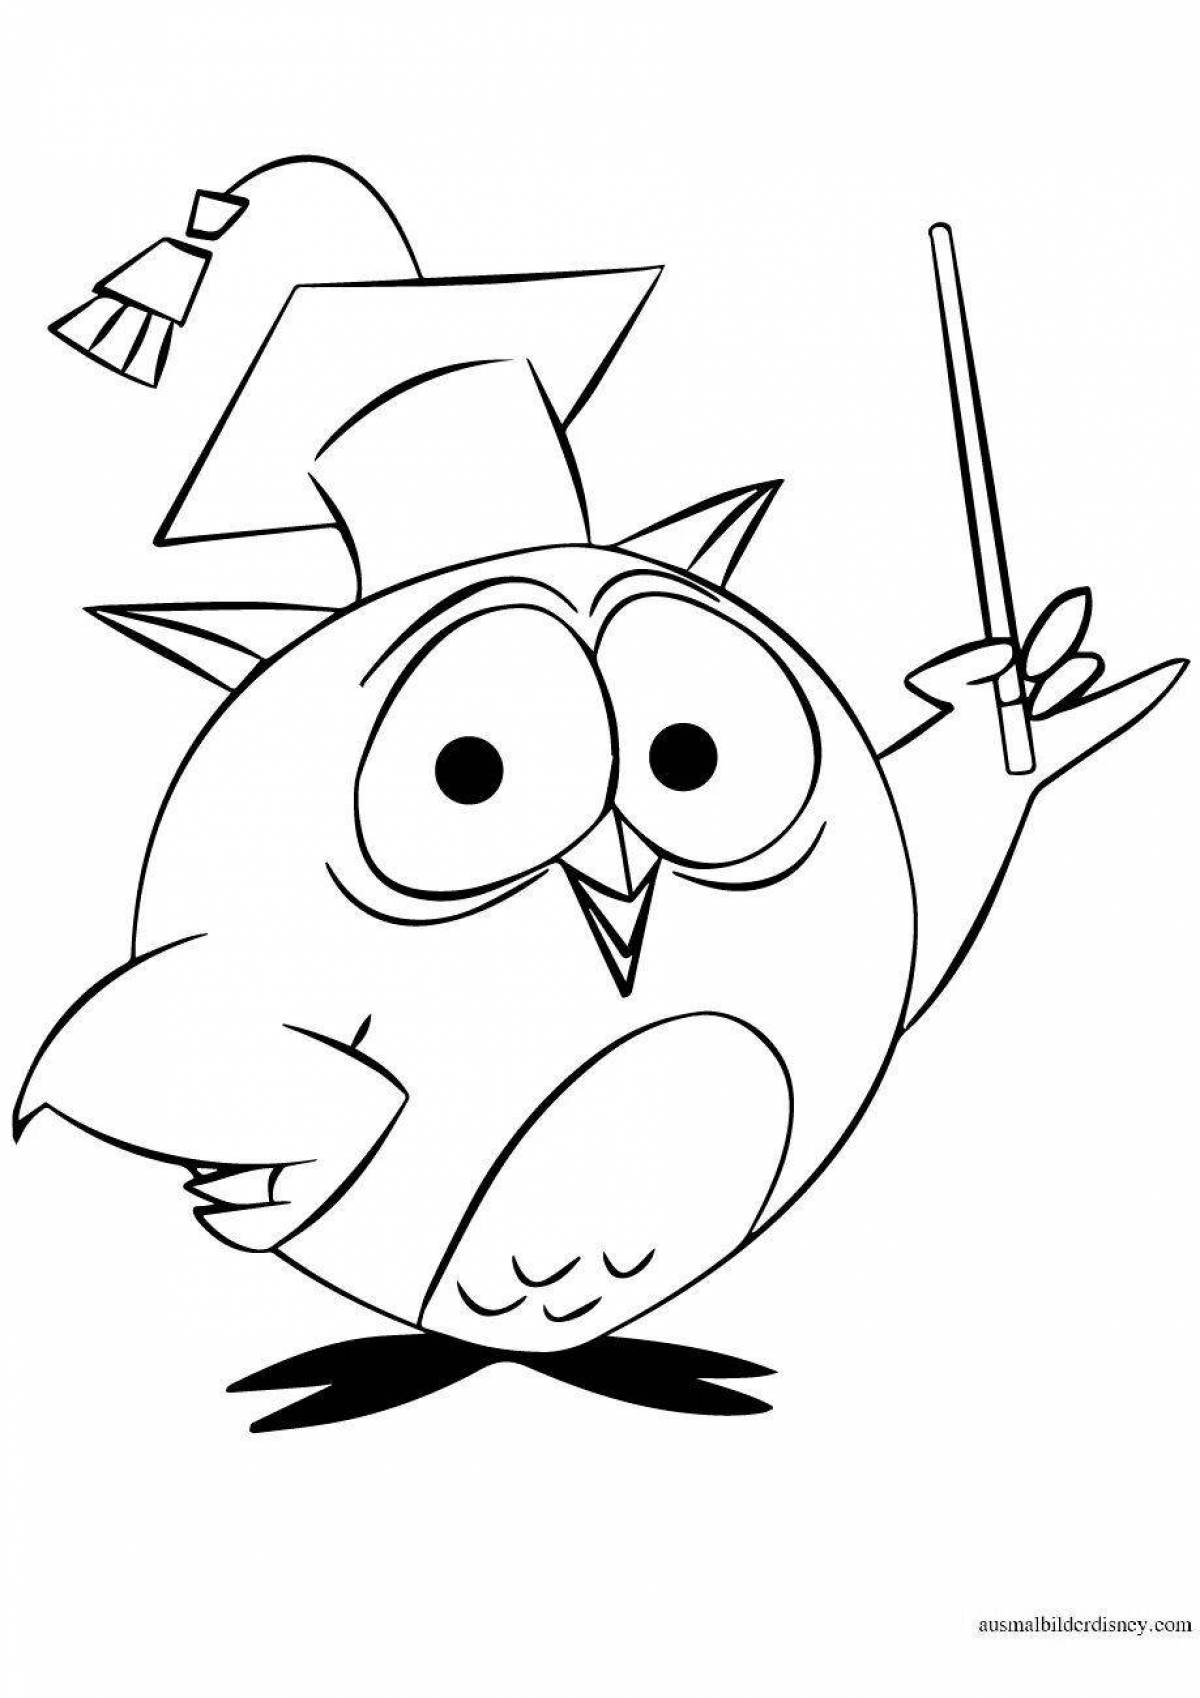 Coloring page smart owl